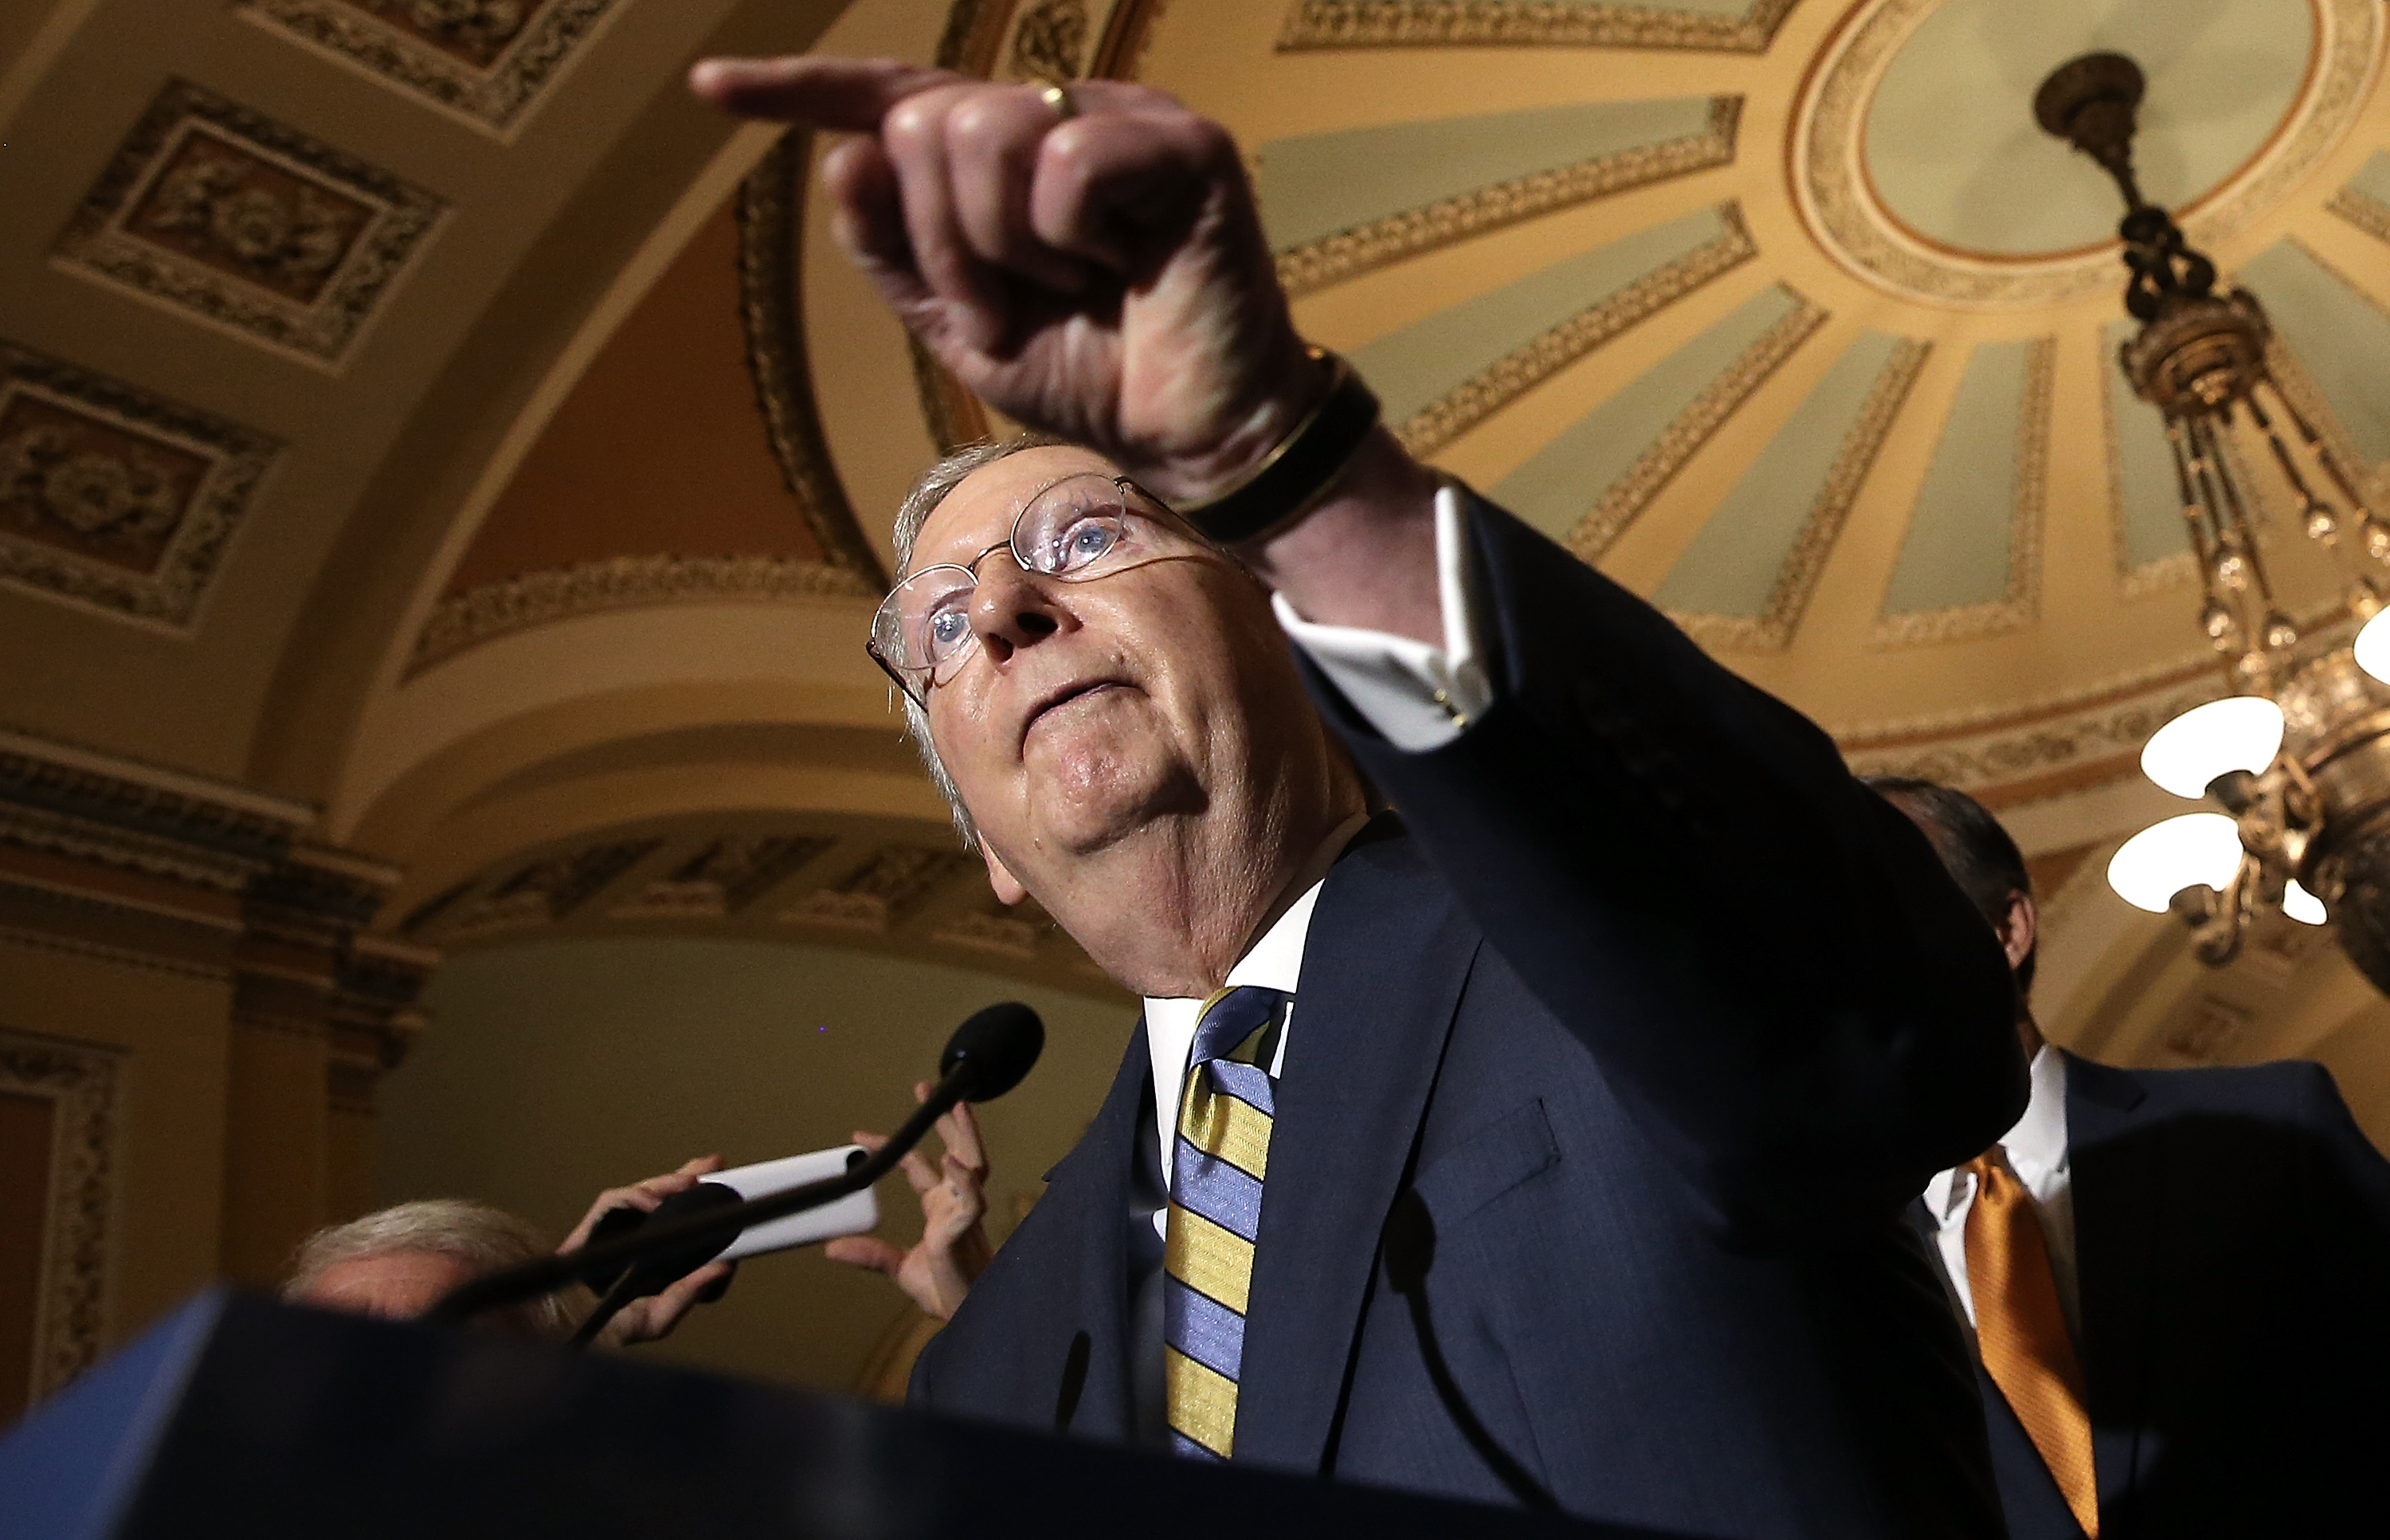 Senate Majority Leader Mitch McConnell (R-KY) answers questions at the U.S. Capitol June 2, 2015 in Washington, D.C. (Win McNamee—Getty Images)